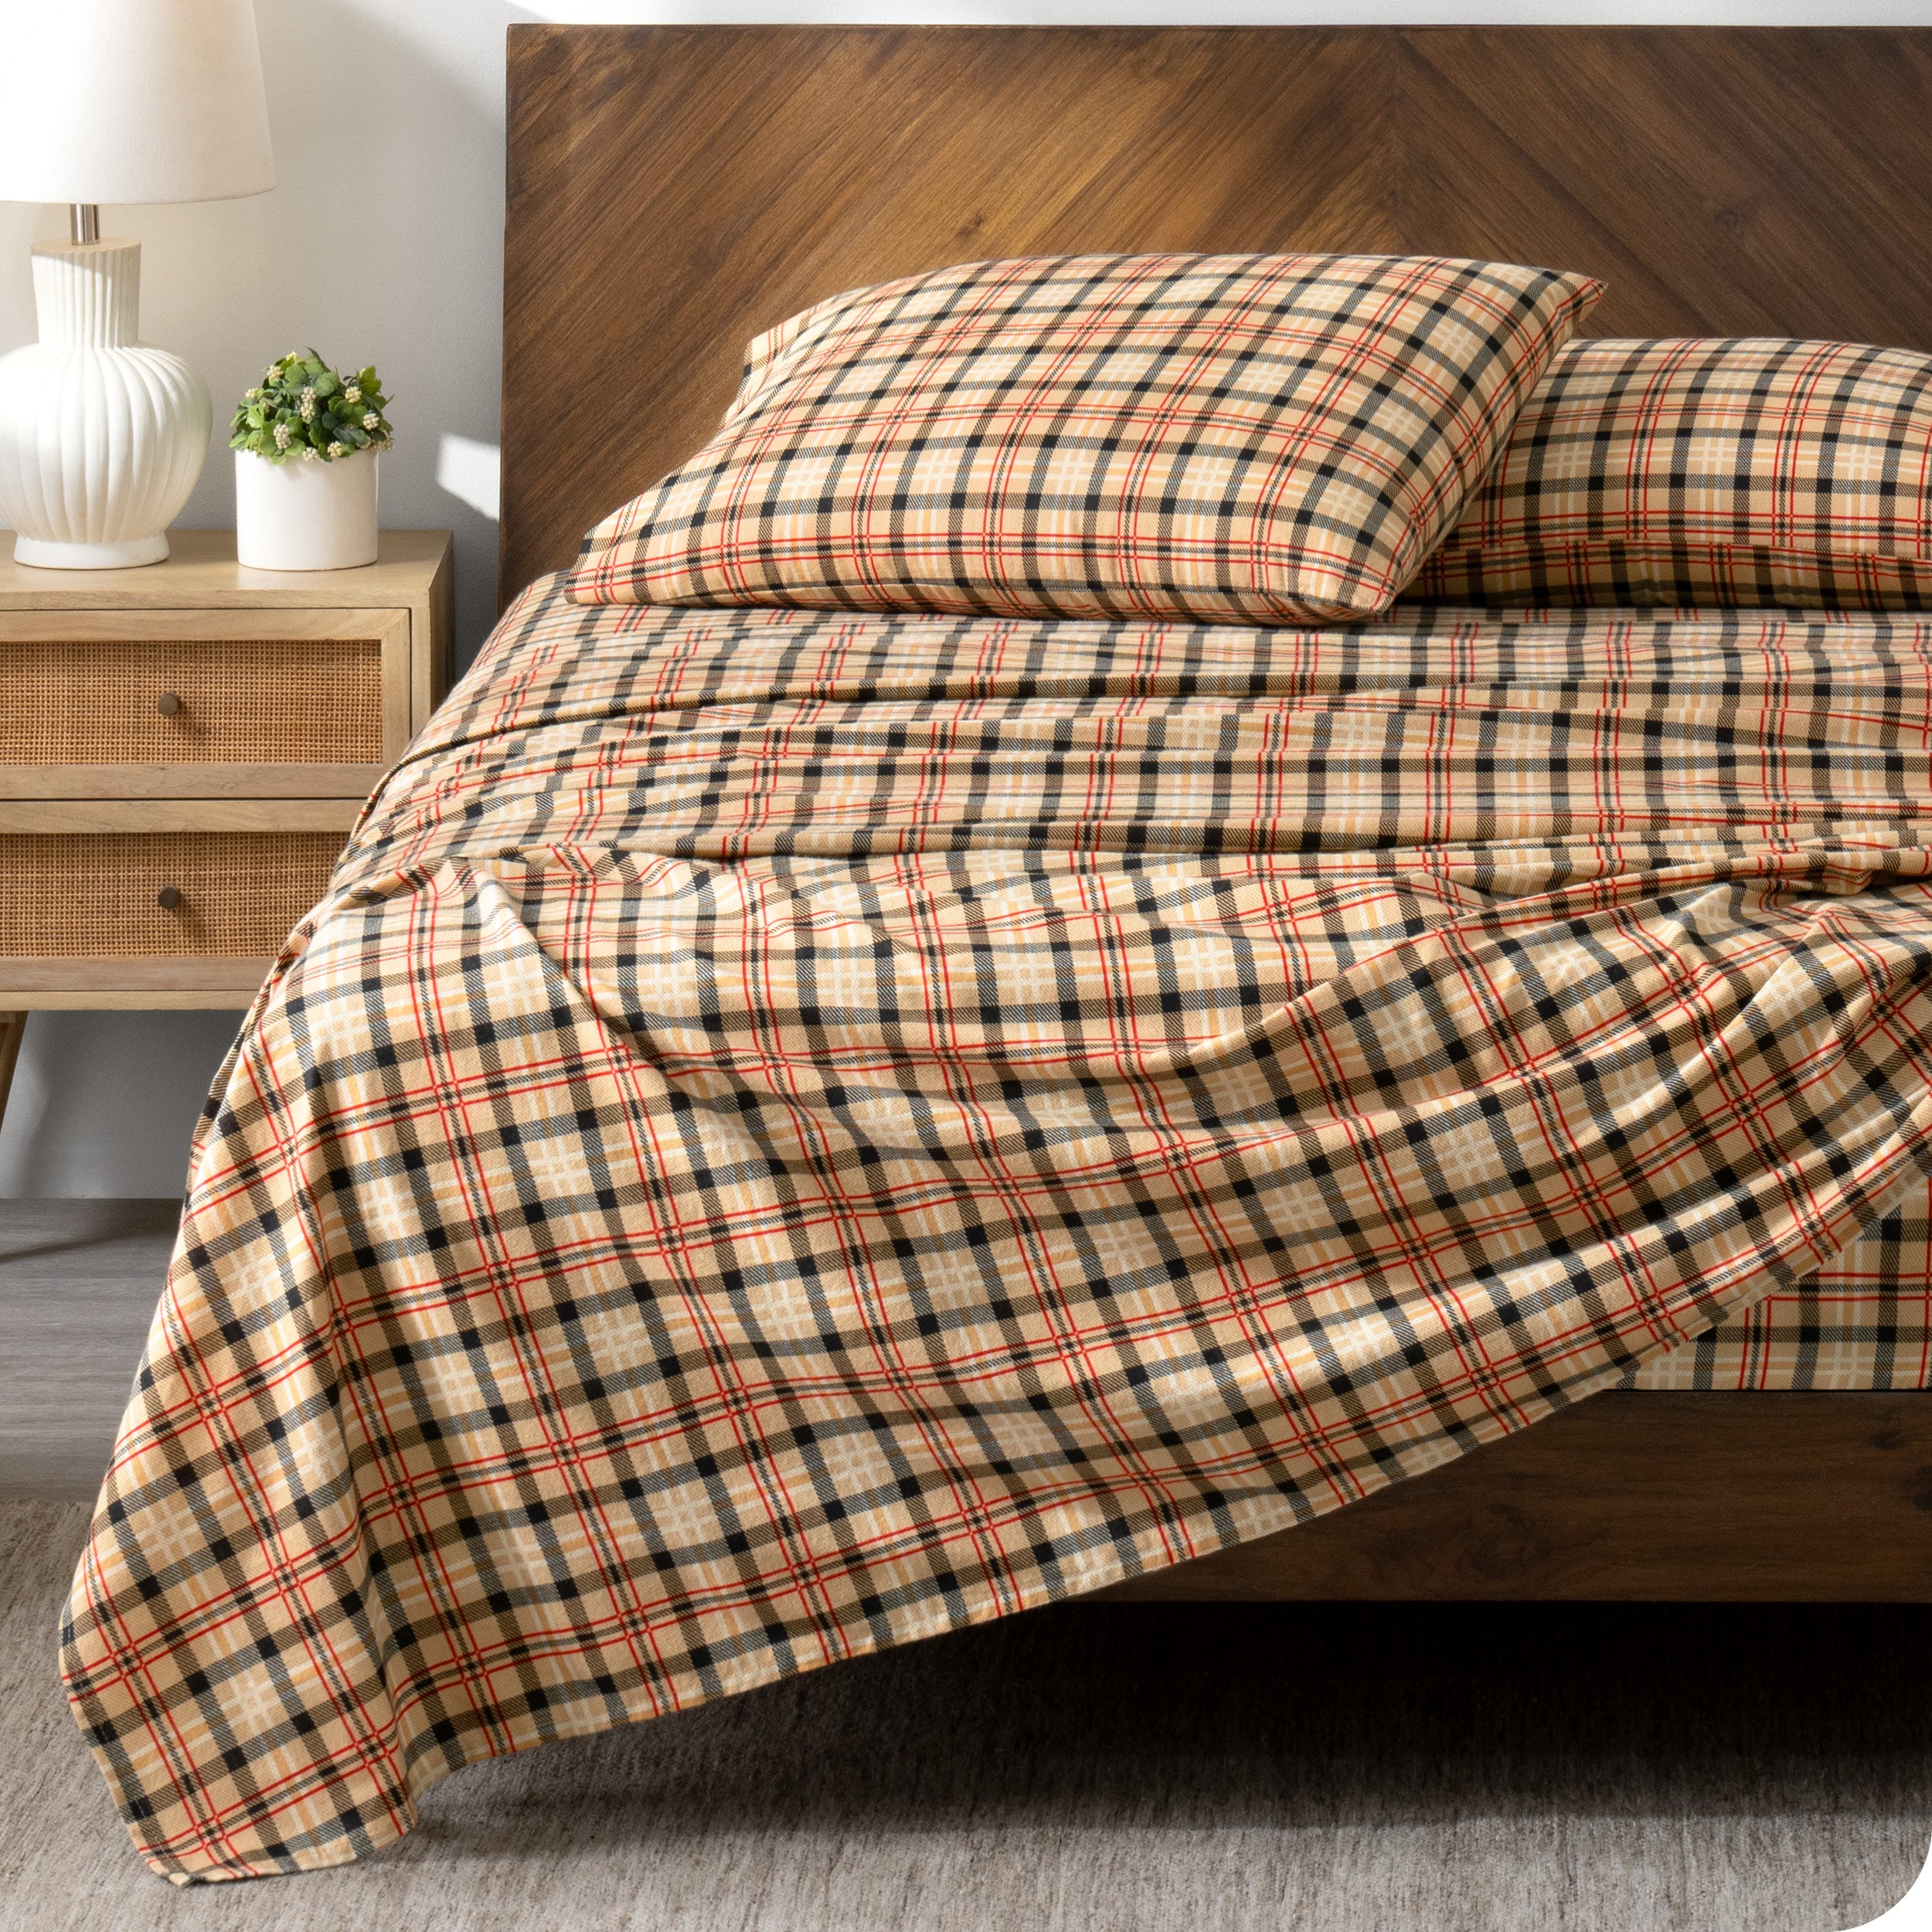 Wooden bed frame with flannel print sheets on the bed